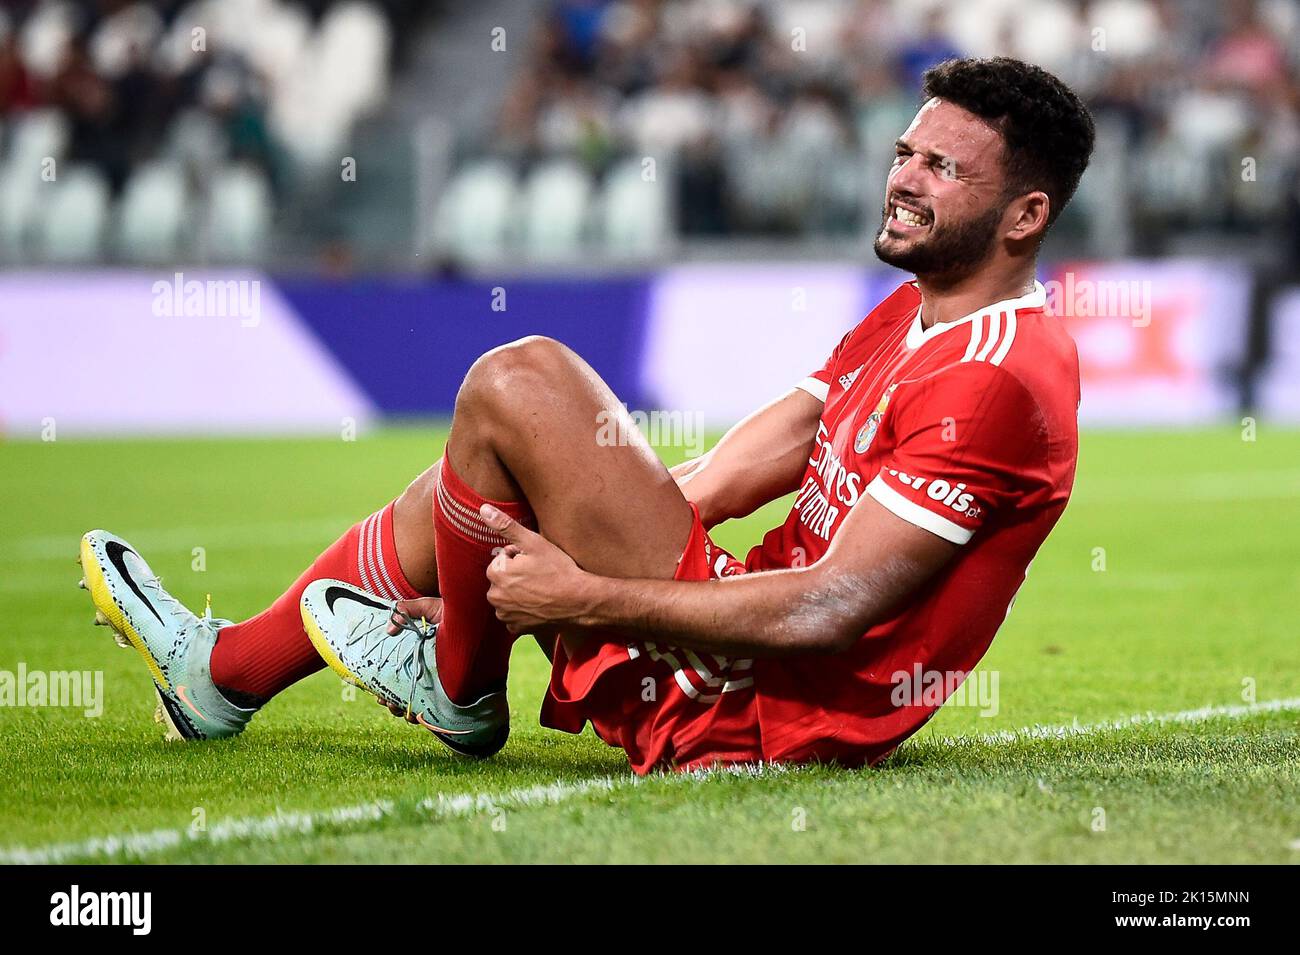 Turin, Italy. 14 September 2022. Goncalo Ramos of SL Benfica reacts during the UEFA Champions League football match between Juventus FC and SL Benfica. Credit: Nicolò Campo/Alamy Live News Stock Photo